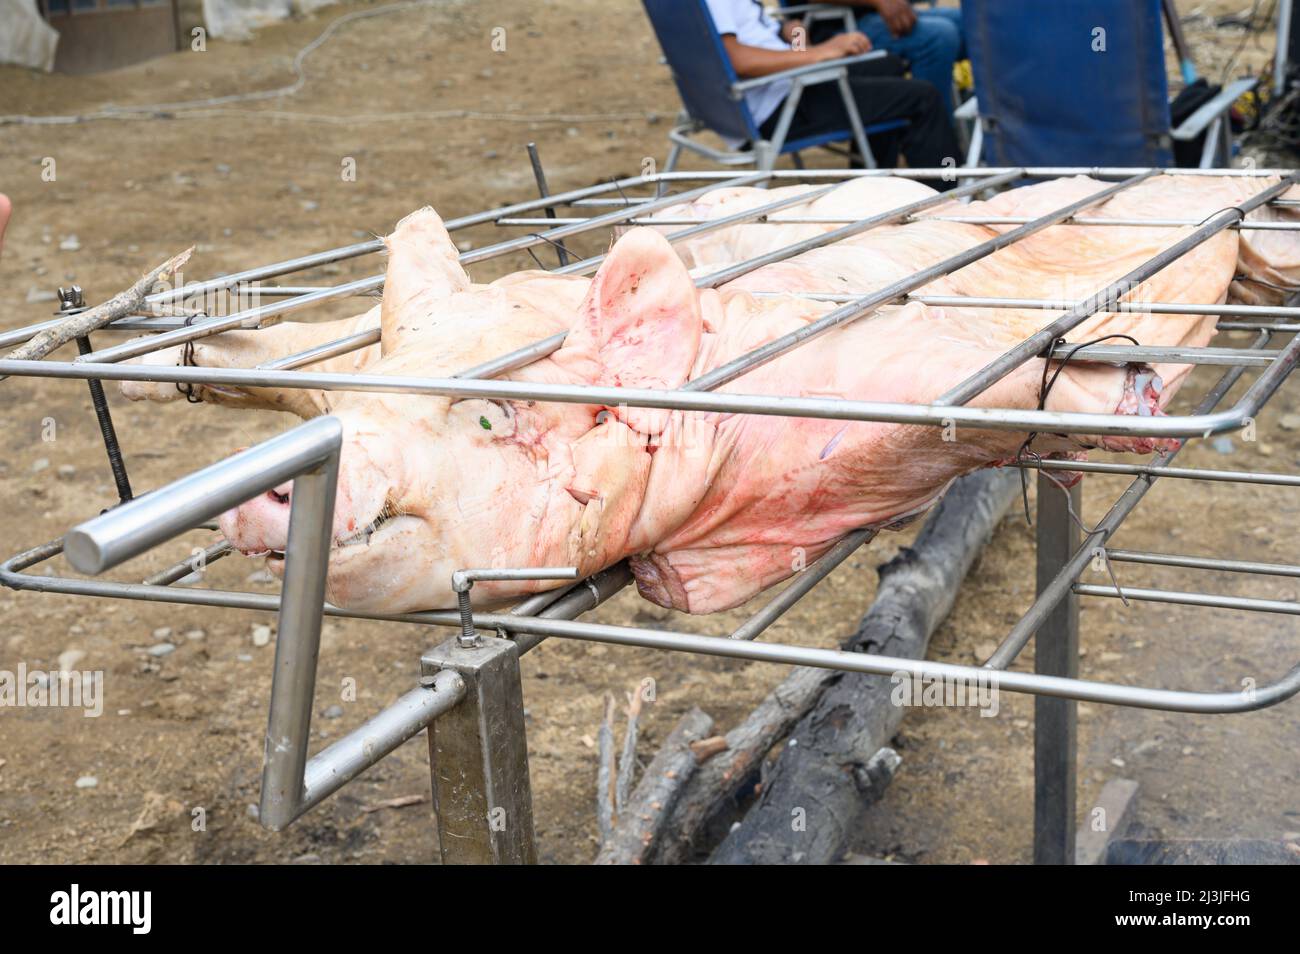 Grilled pig at the street food festival. Roasted pig on the rack. Food Stock Photo